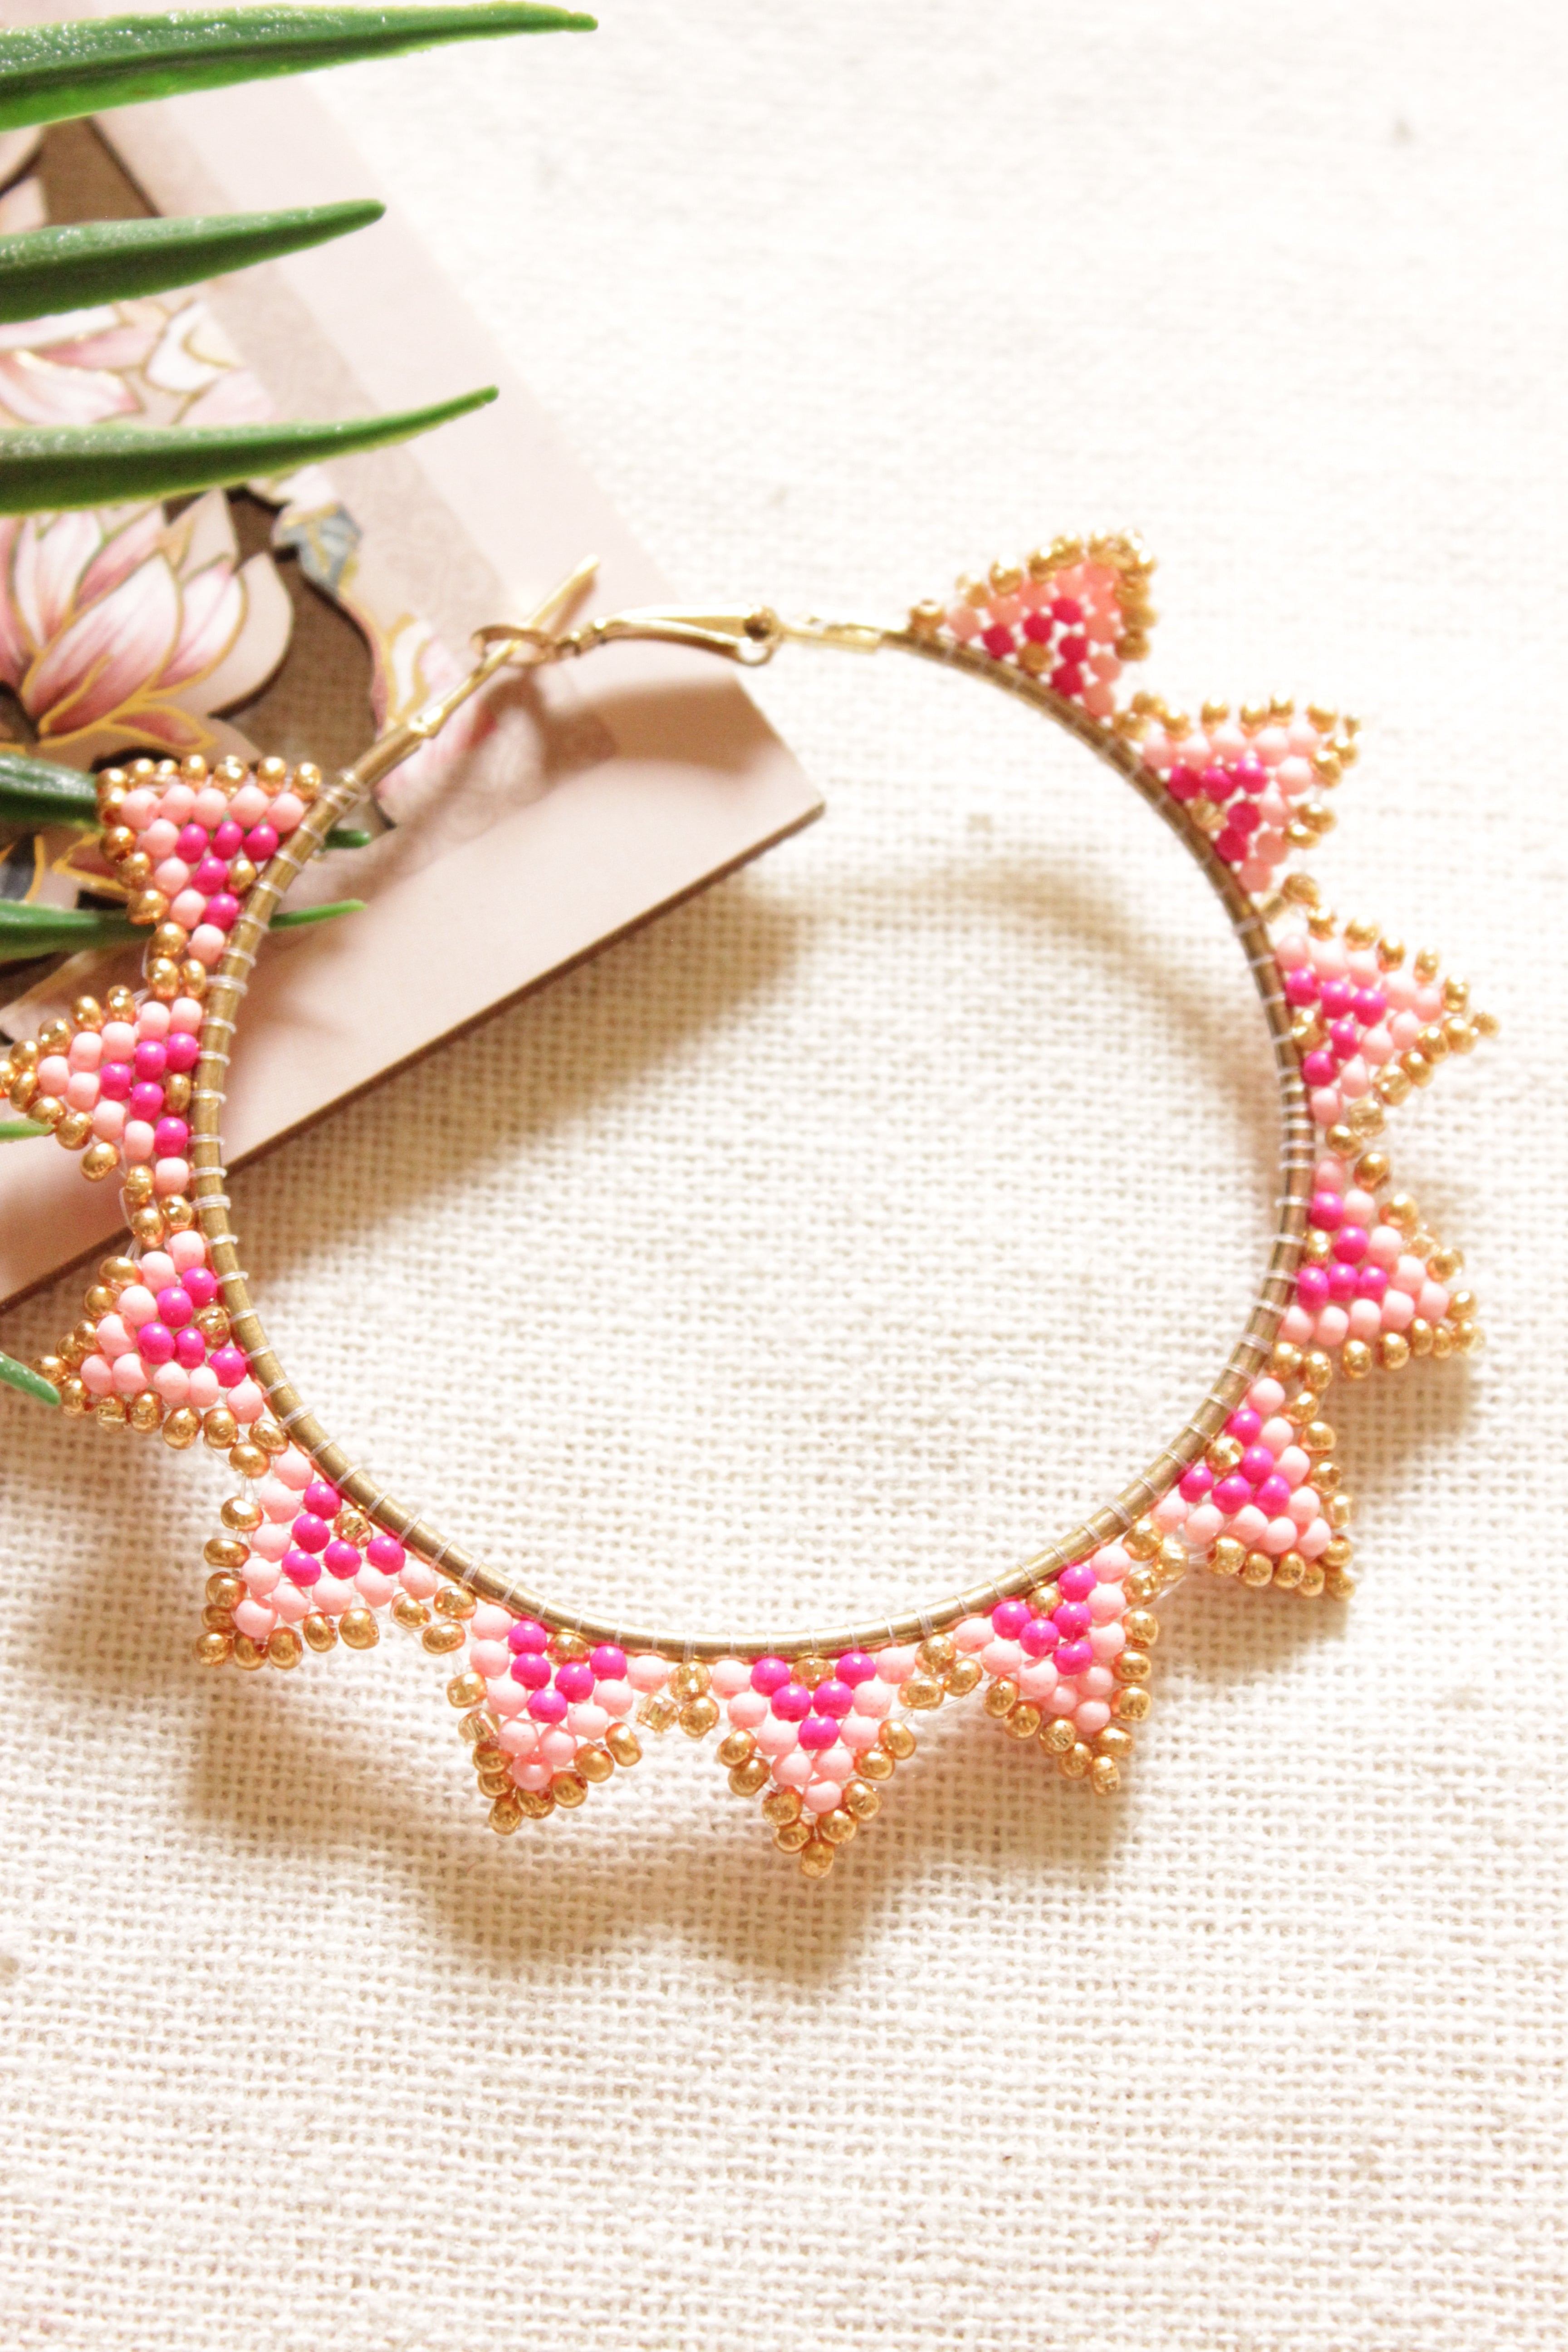 Shades of Pink Hand Beaded Gold Finish Hoop Earrings